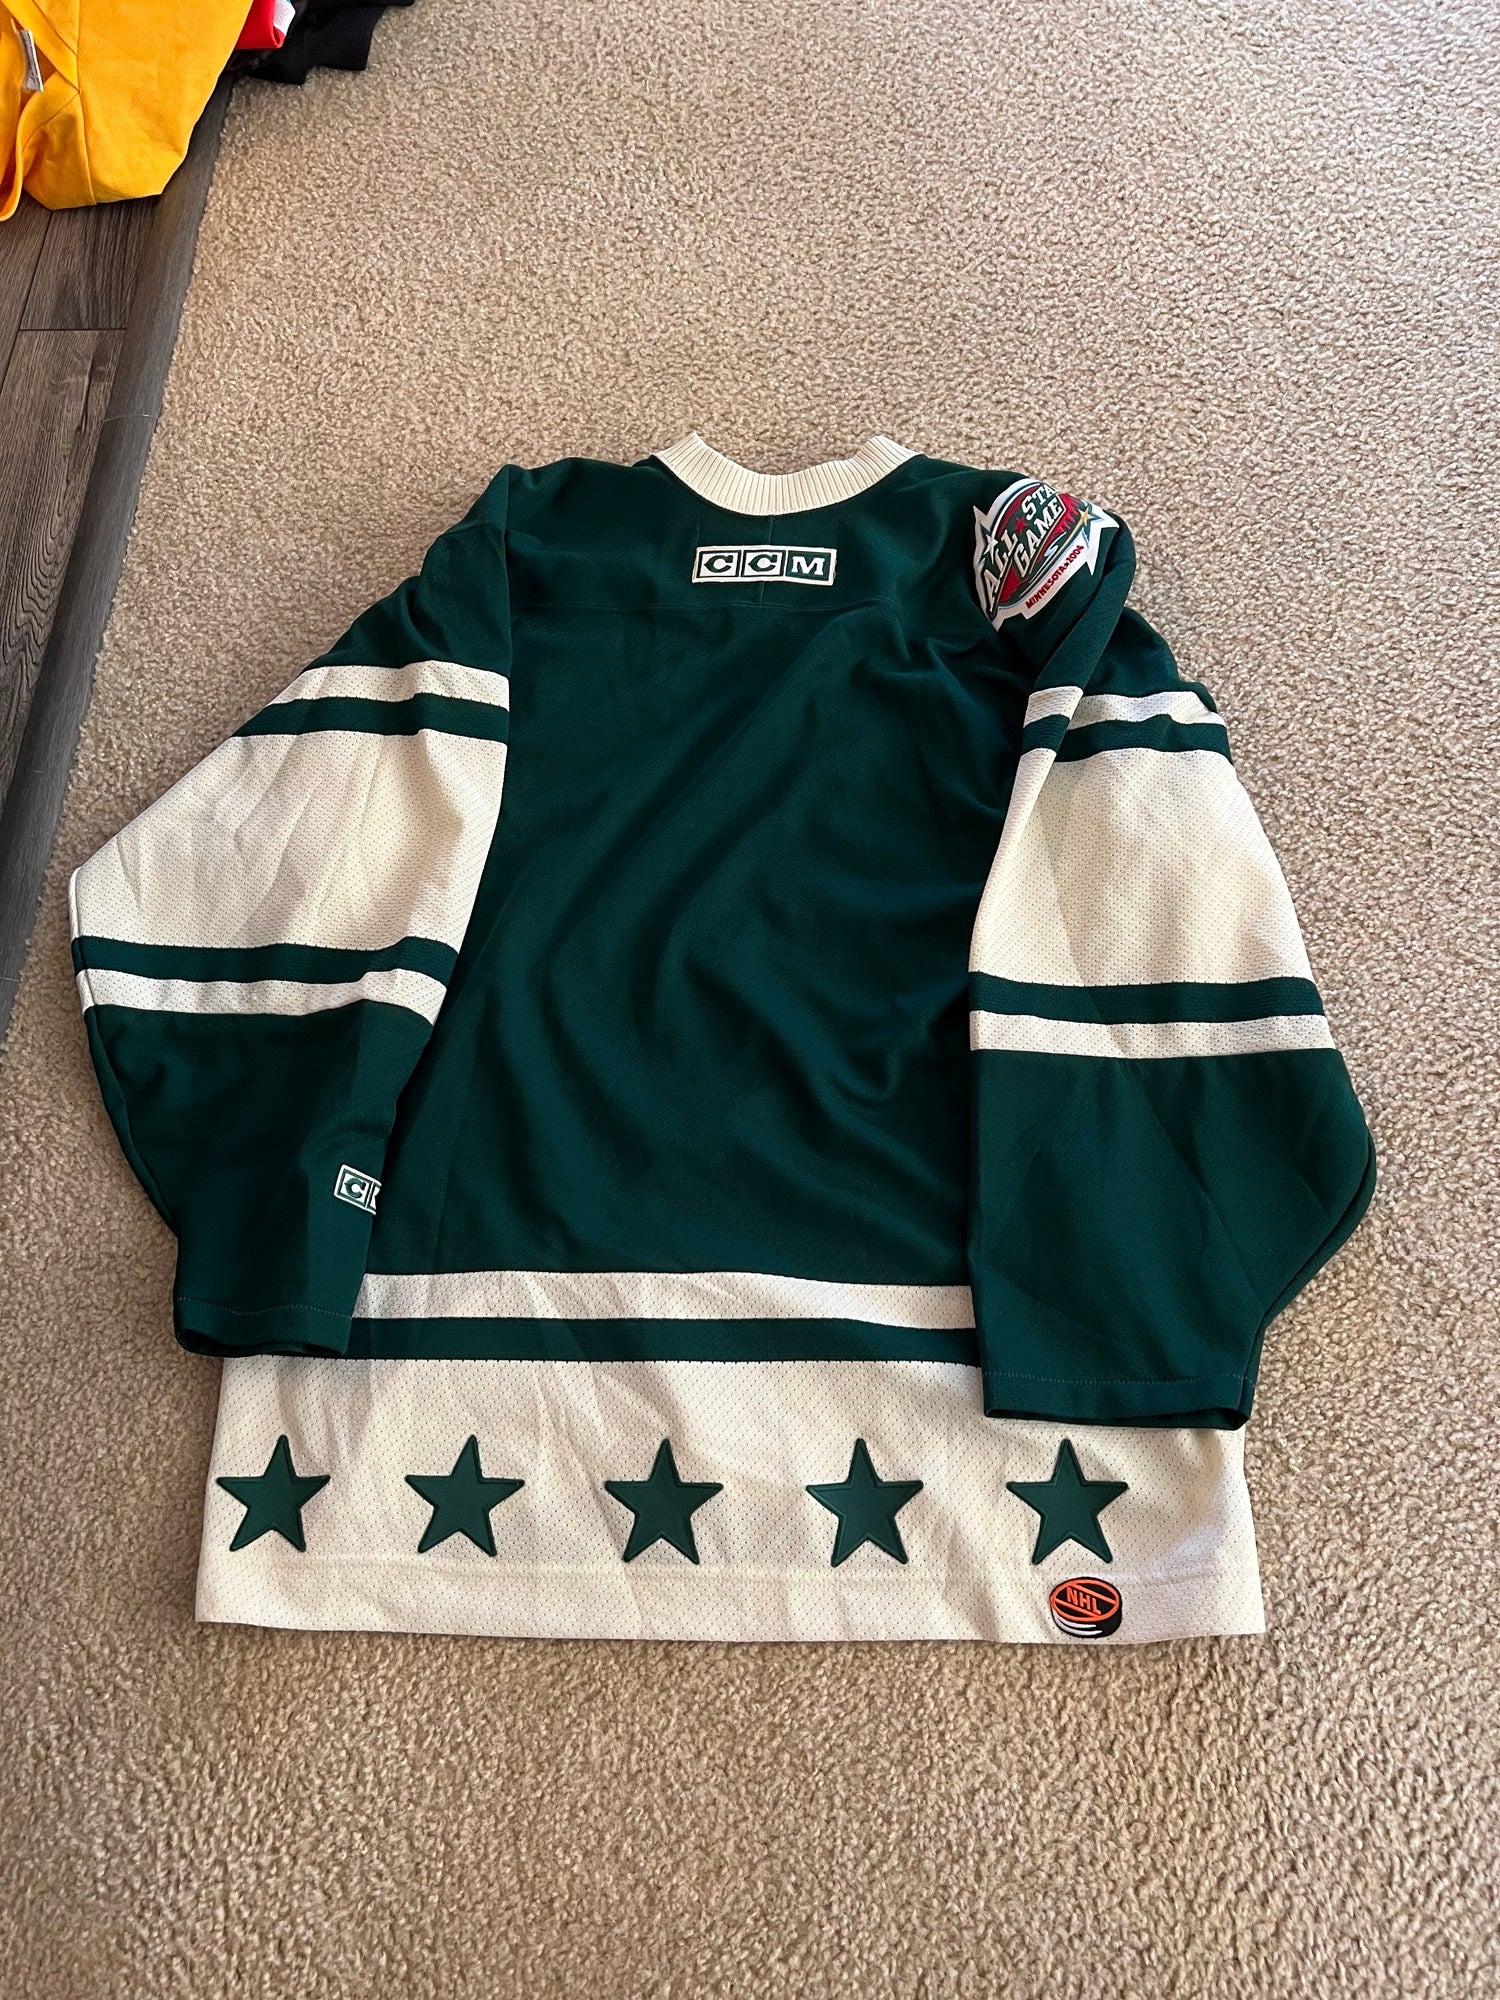 48-PRO/AUTHENTIC 2004 MINNISOTA WESTERN CONFERENCE NHL ALL-STAR HOCKEY  JERSEY